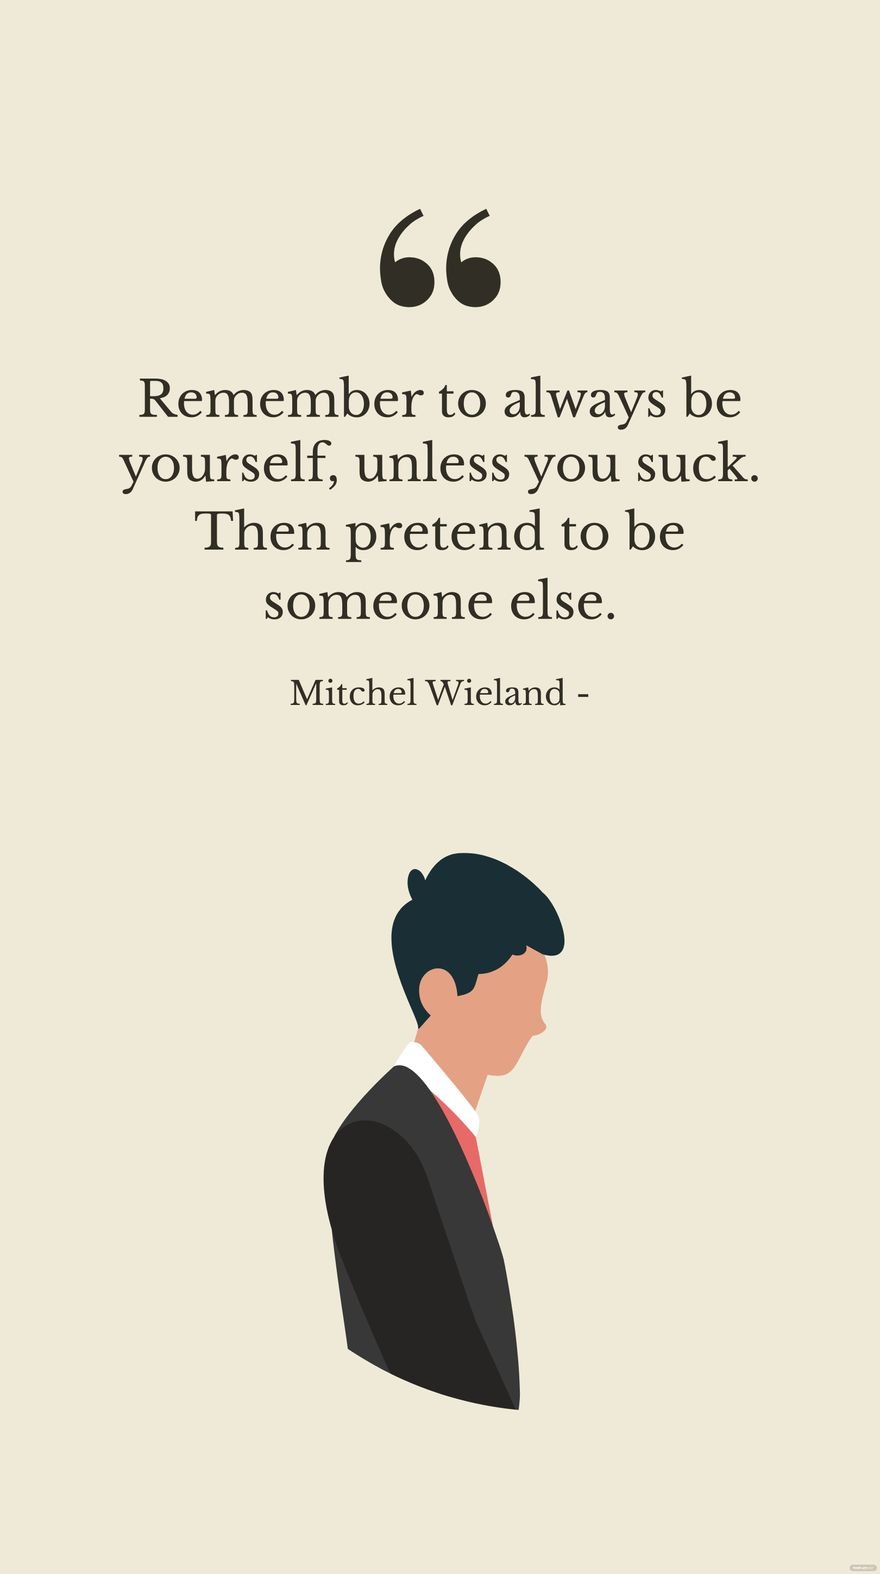 Mitchel Wieland - Remember to always be yourself, unless you suck. Then pretend to be someone else. in JPG